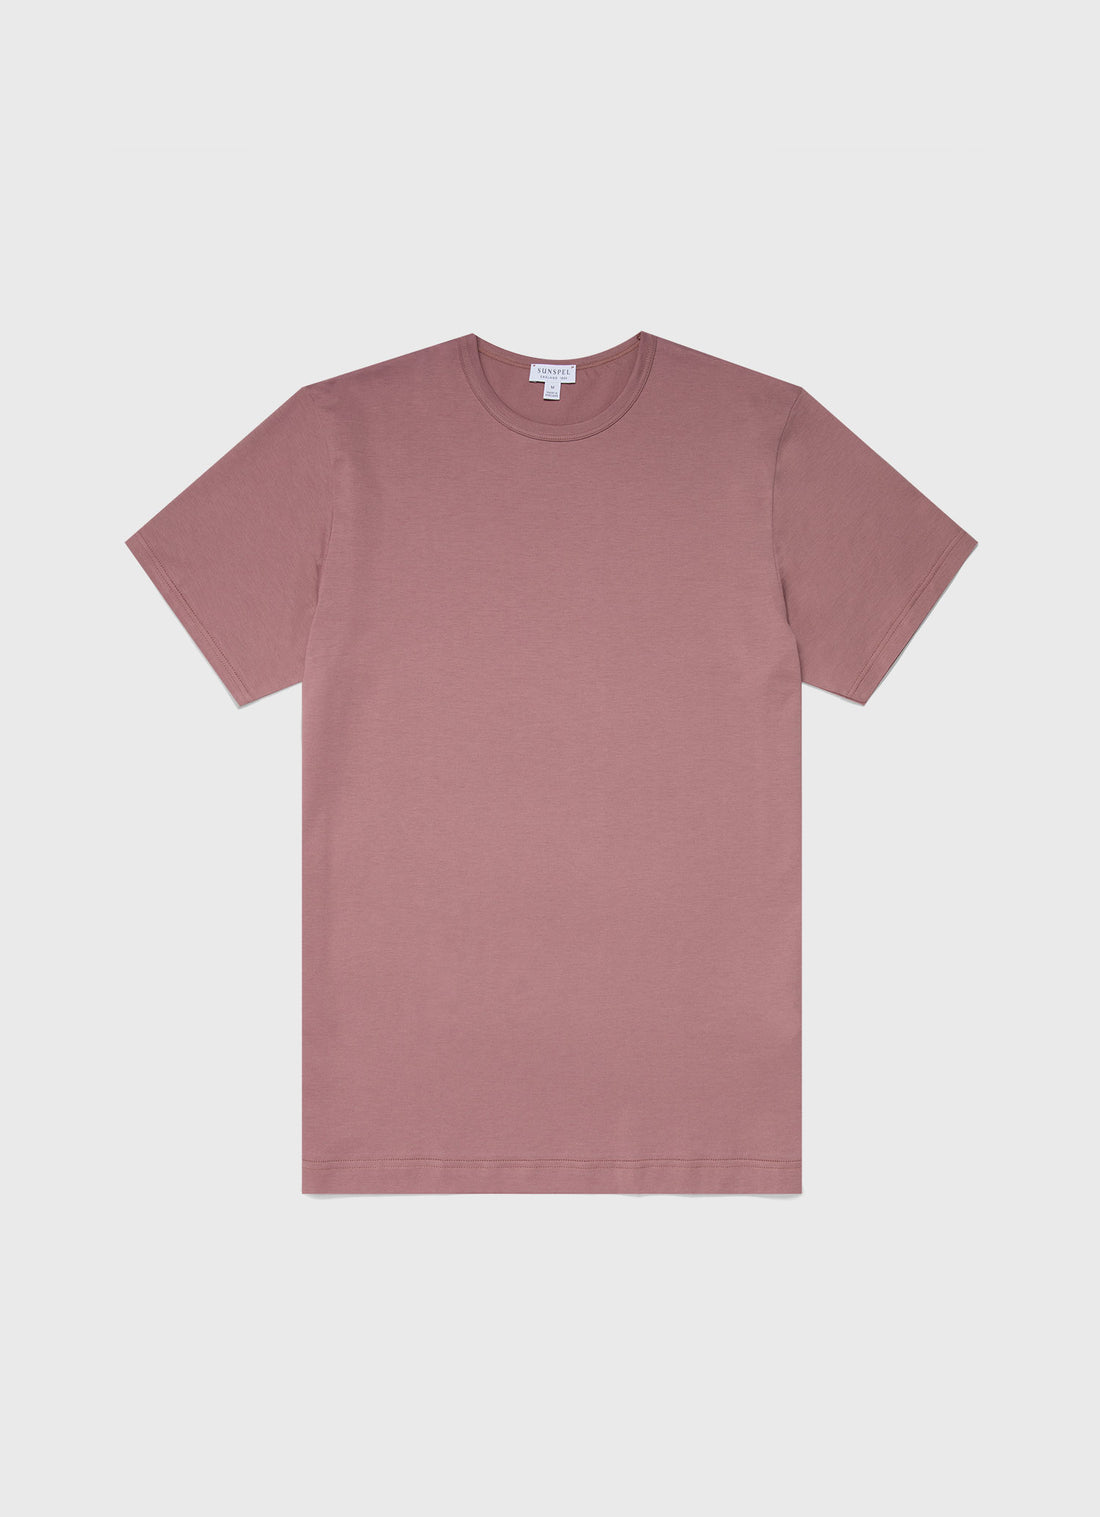 Men's Classic T-shirt in Vintage Pink